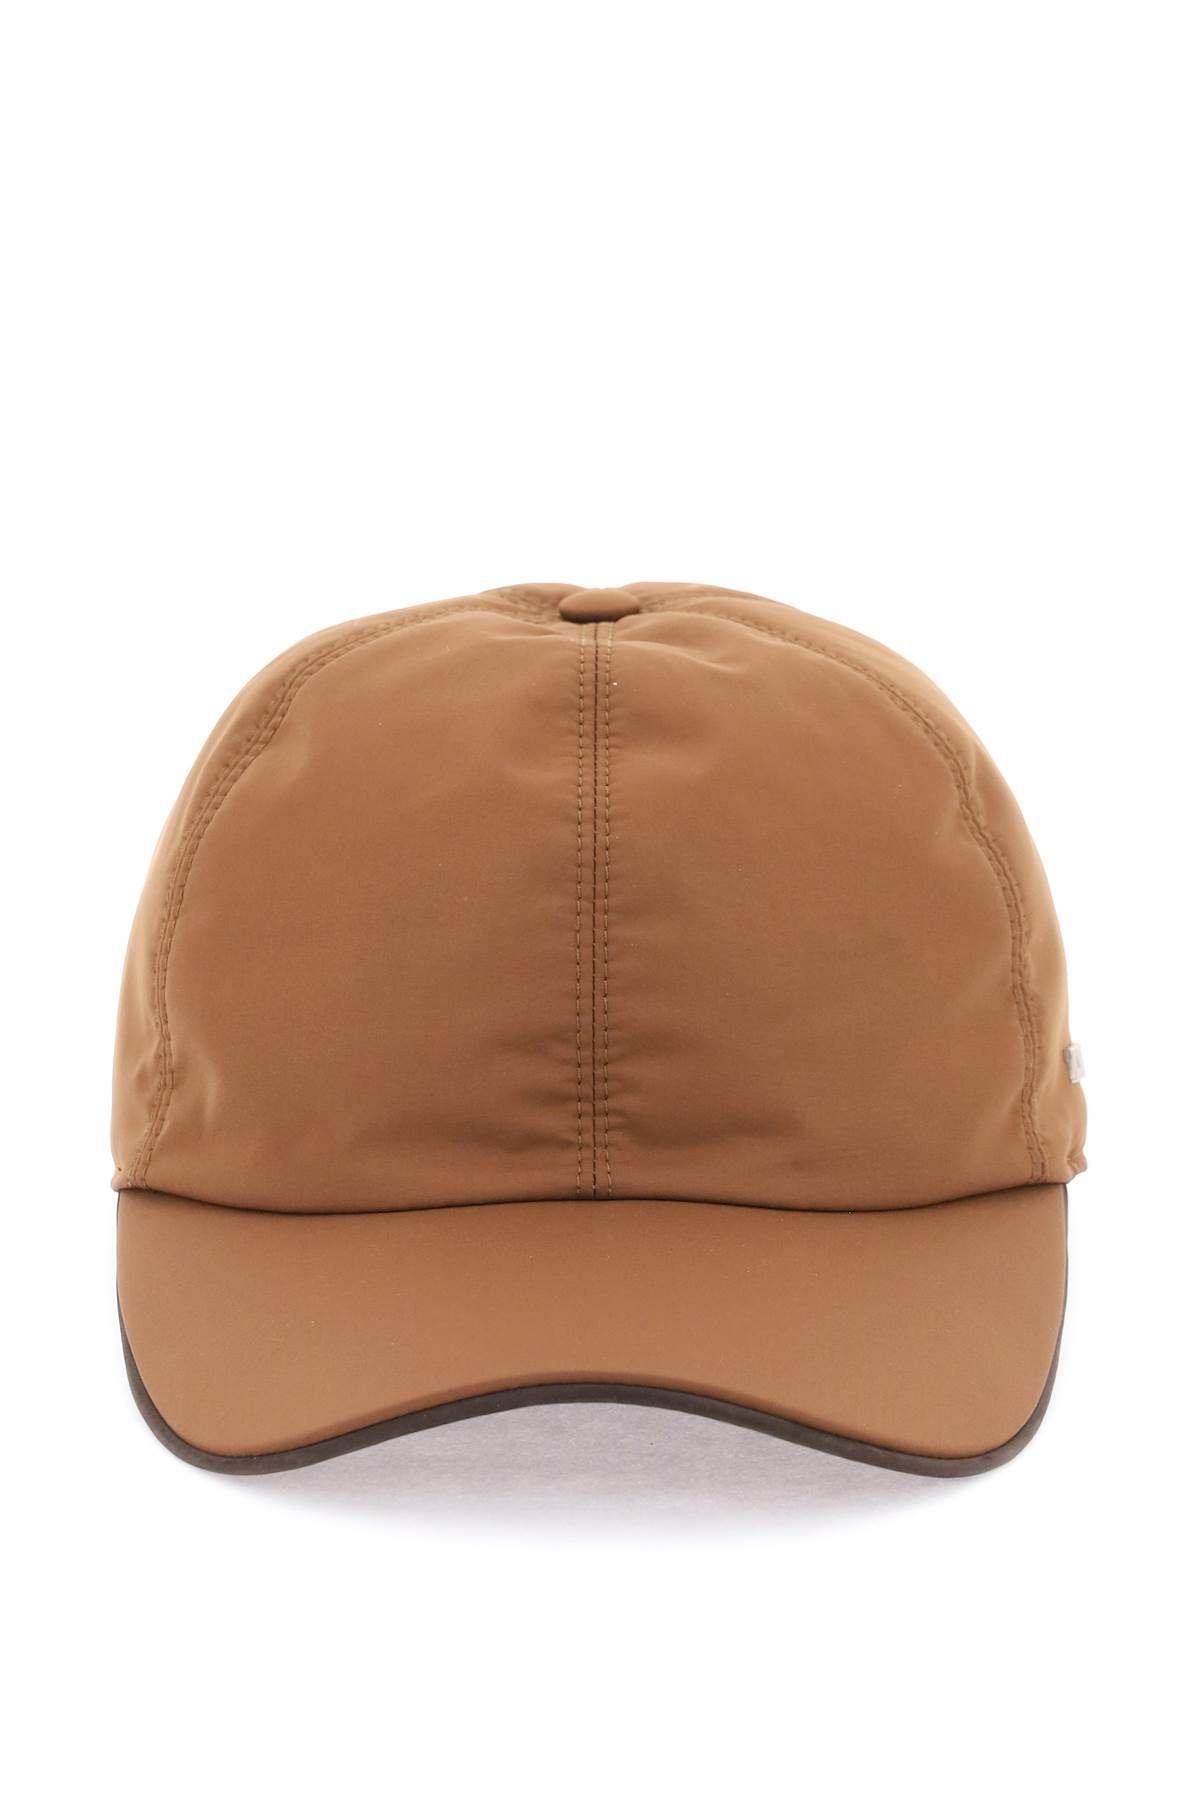 Shop Zegna Baseball Cap With Leather Trim In Brown